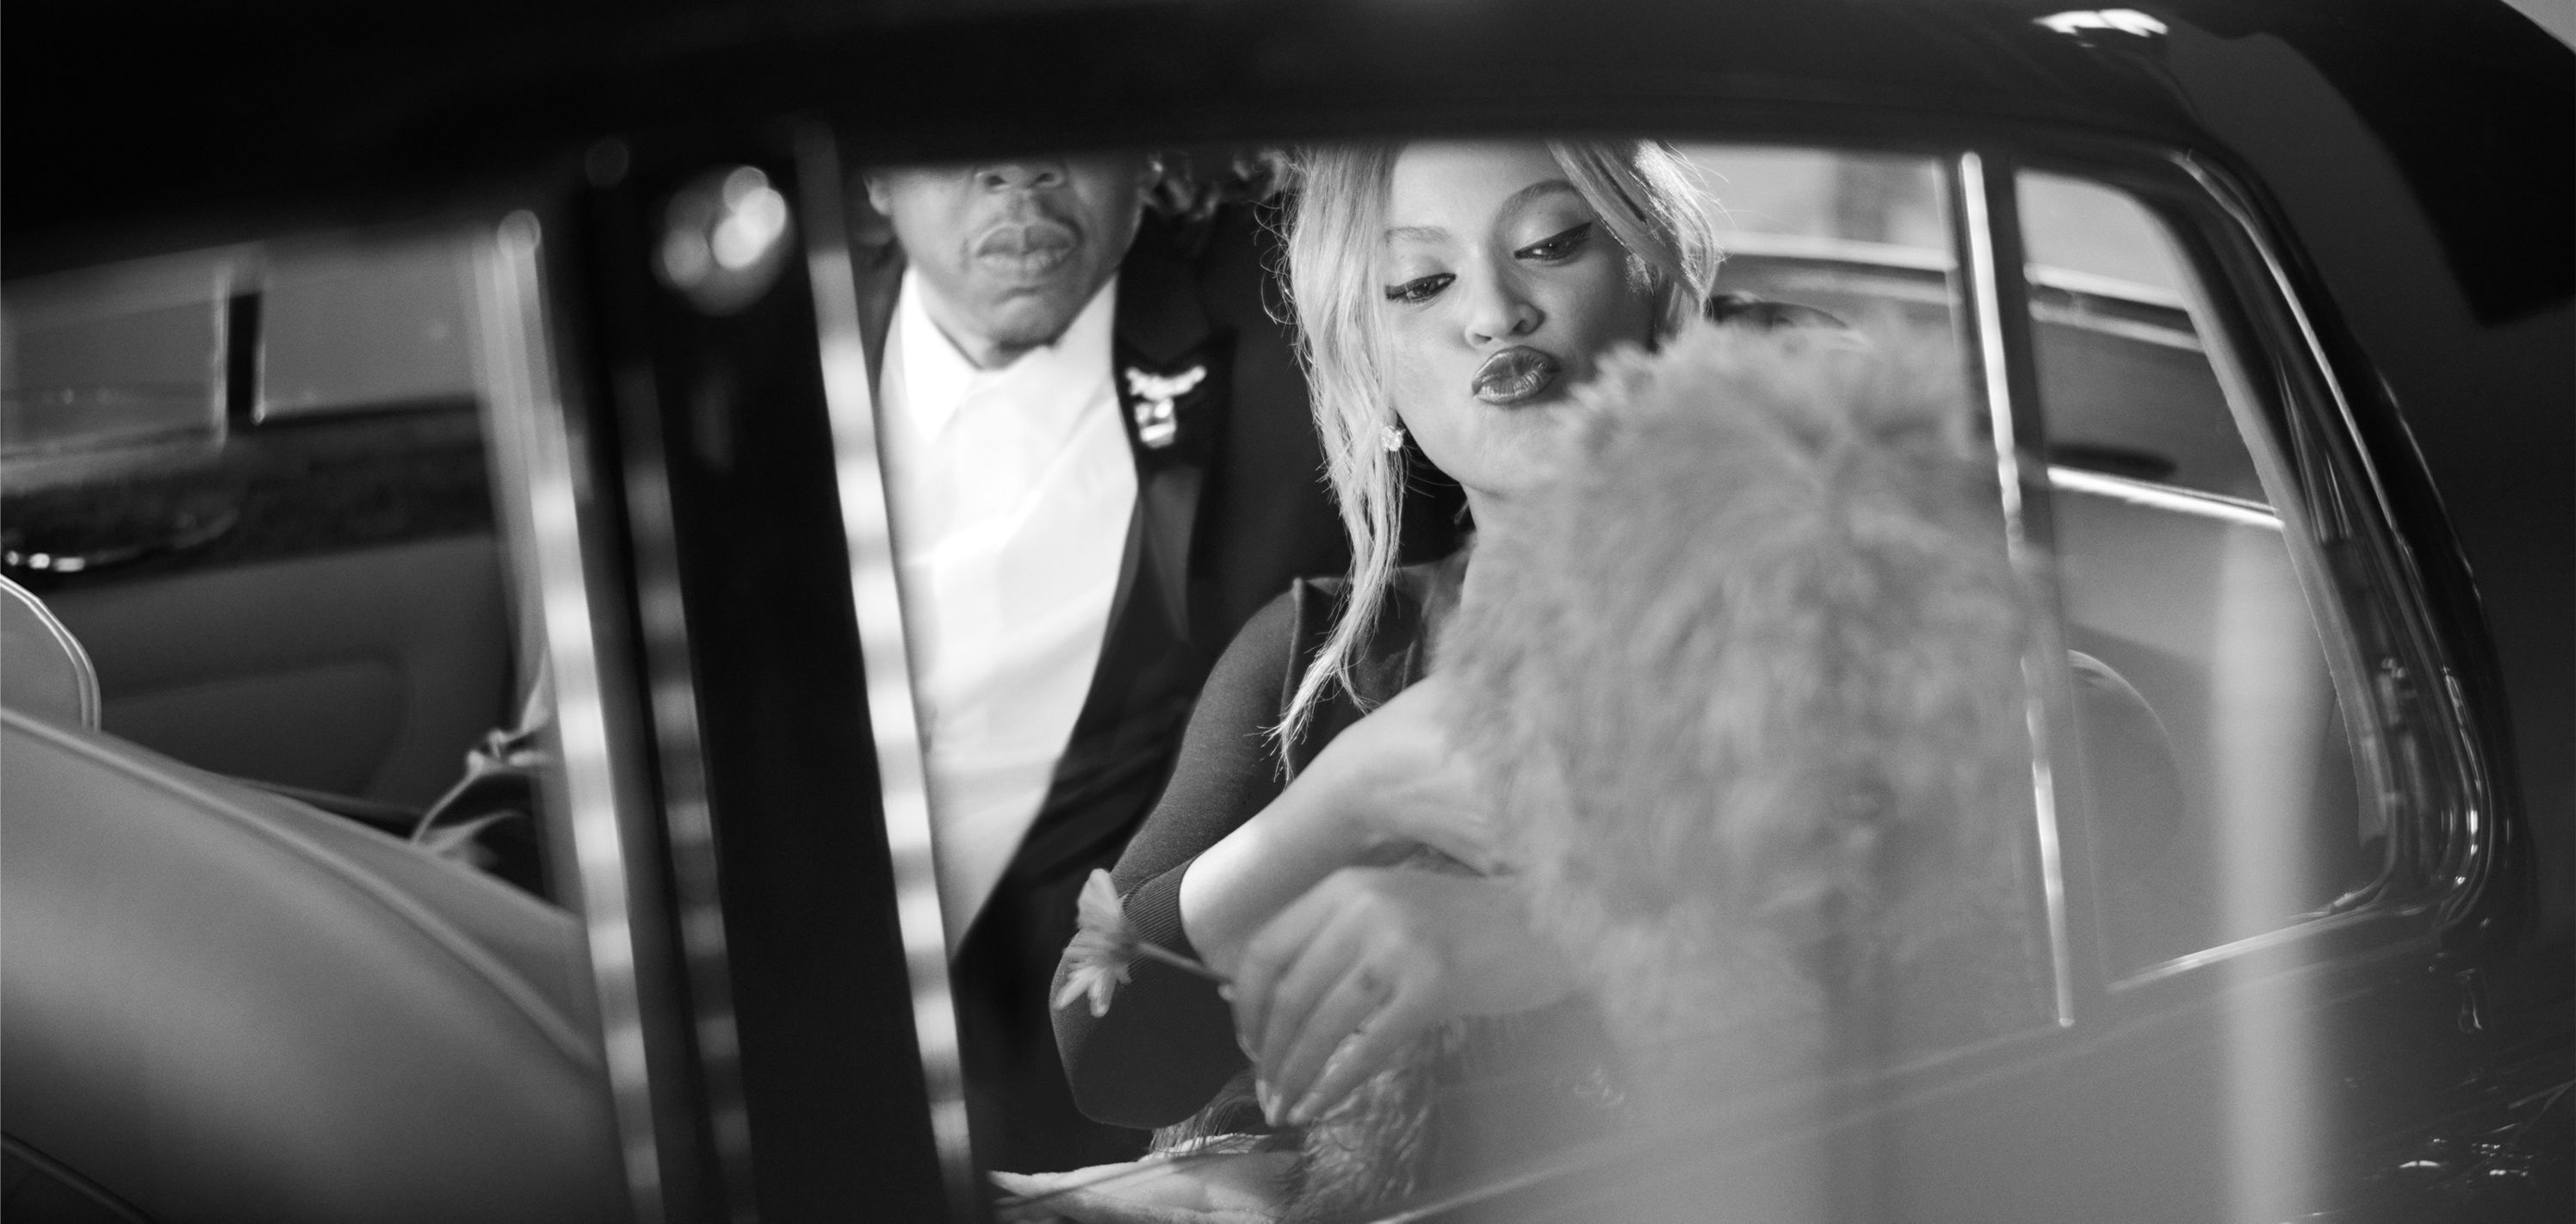 beyonce wedding pictures 2022